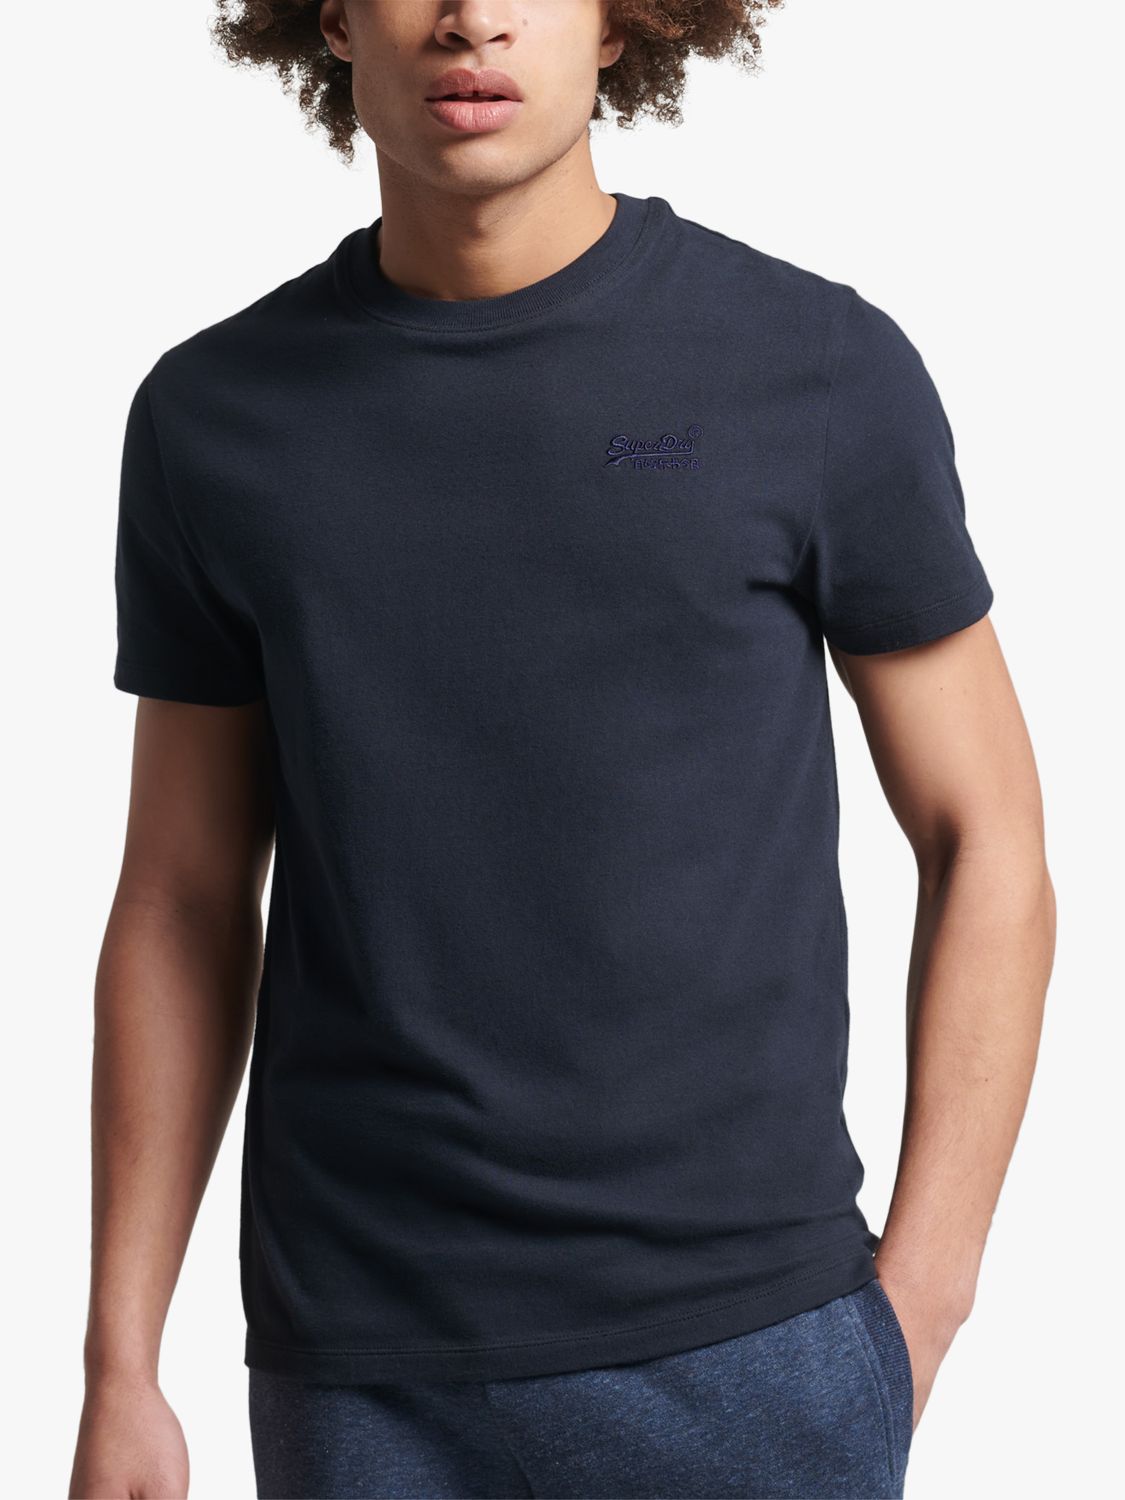 Eclipse Organic T-Shirt, Cotton & Partners Superdry Navy Vintage Embroidered at Logo John Lewis